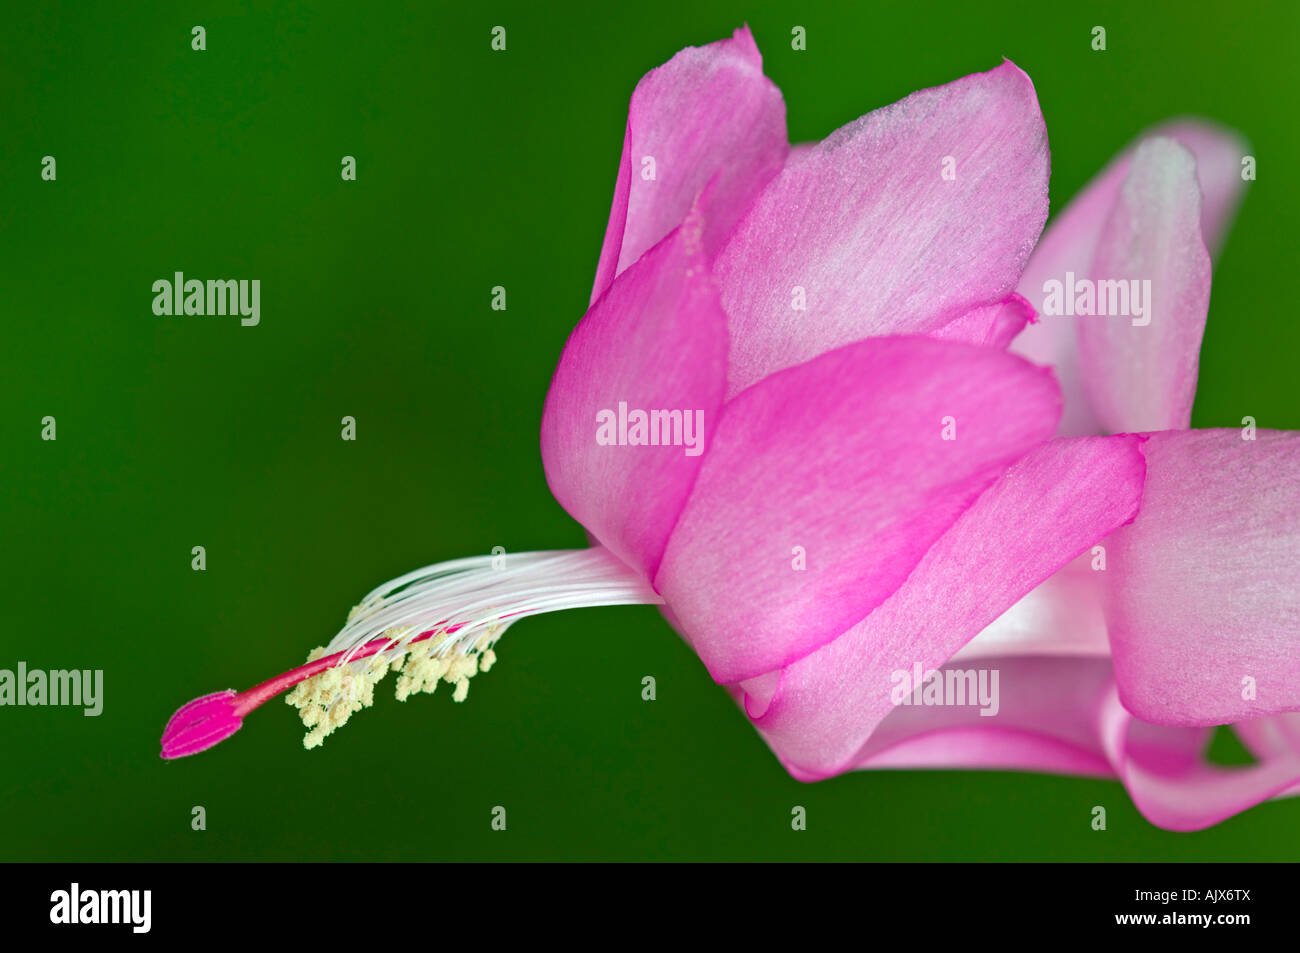 Christmas cactus schlumbergera in detail with pink blossom in full bloom  Stock Photo - Alamy